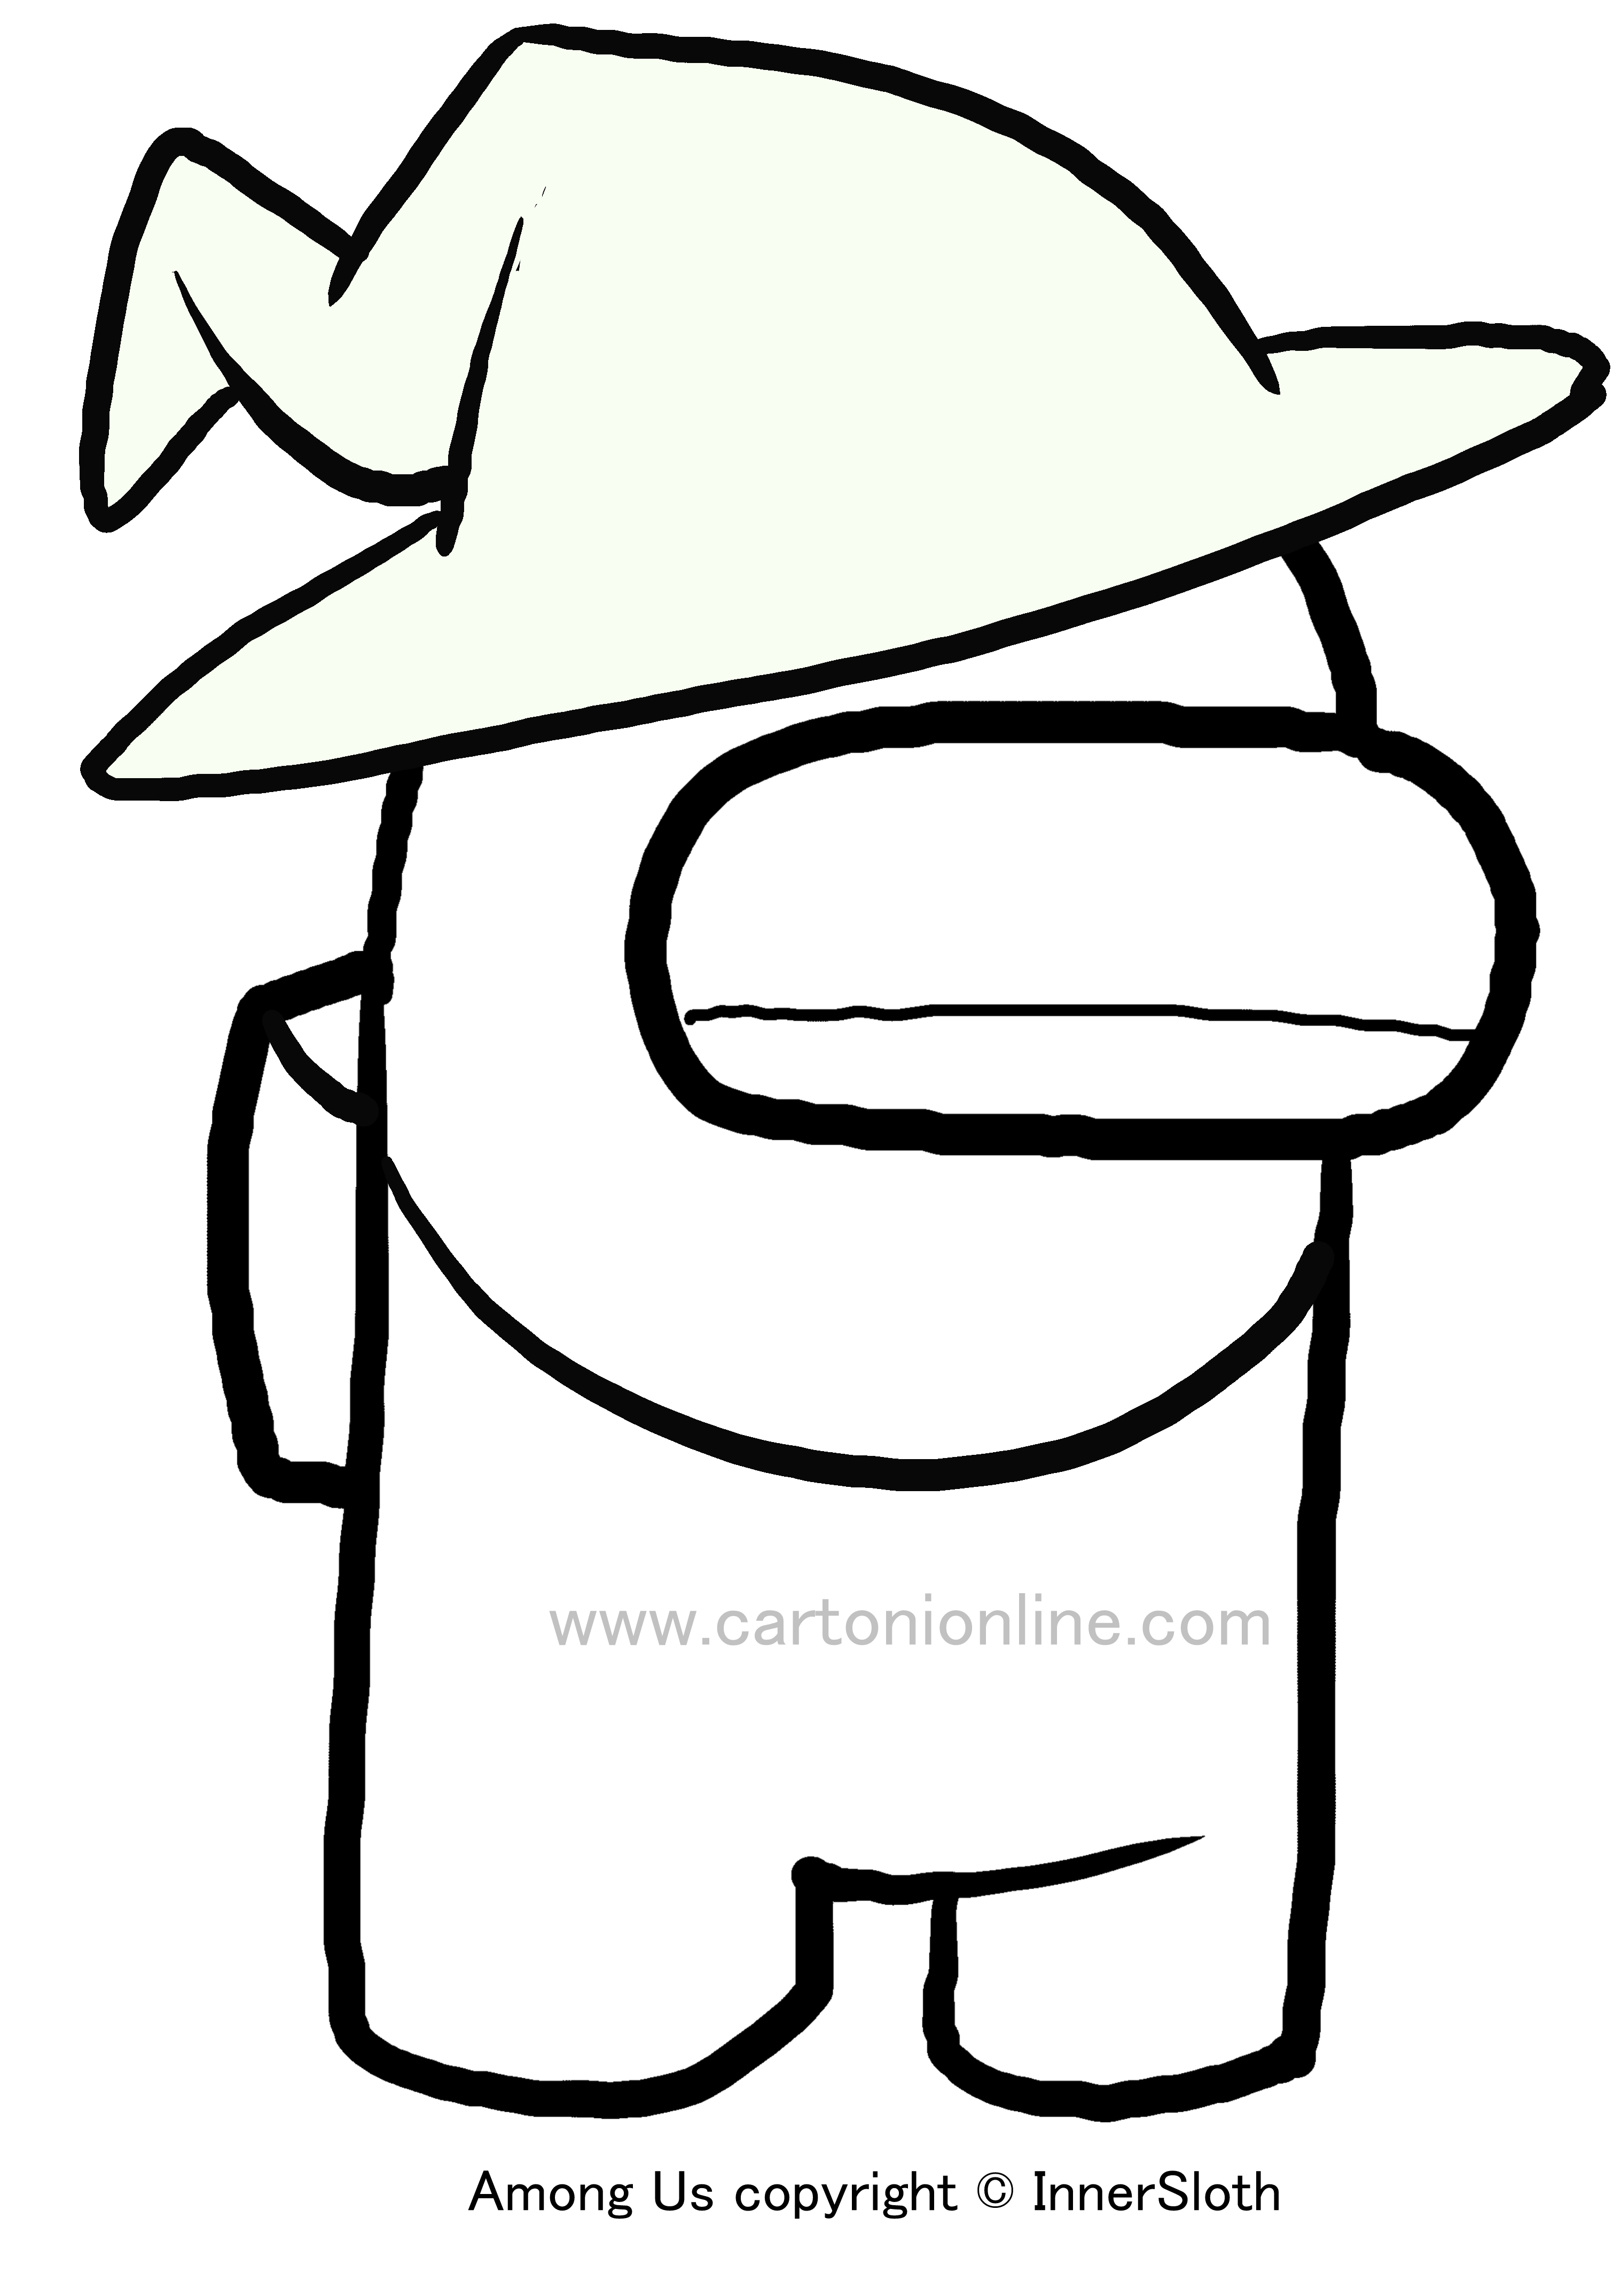 Witch from Among Us coloring page to print and coloring